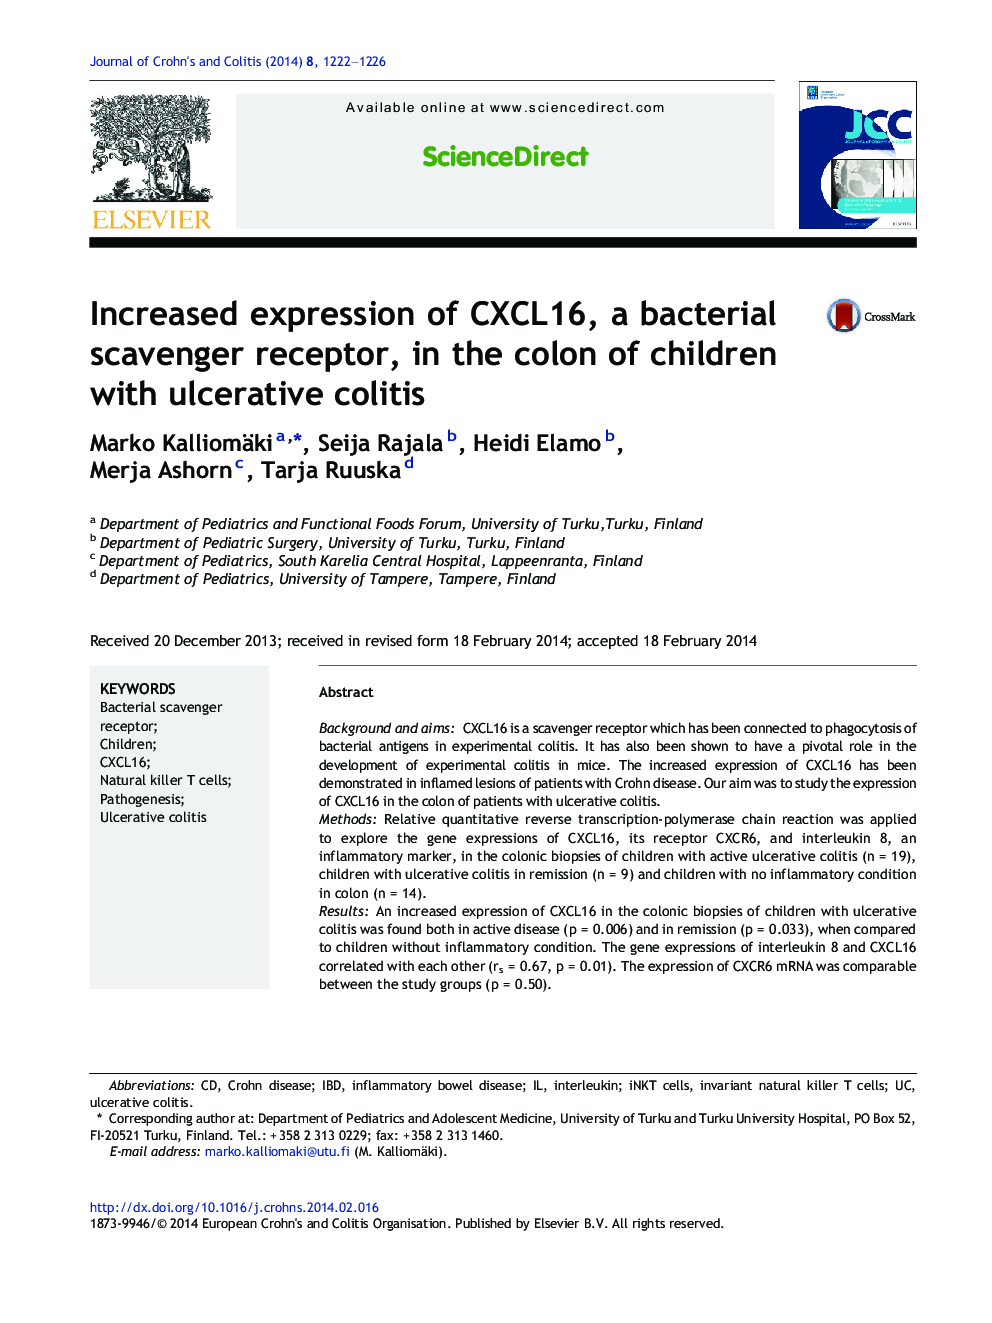 Increased expression of CXCL16, a bacterial scavenger receptor, in the colon of children with ulcerative colitis